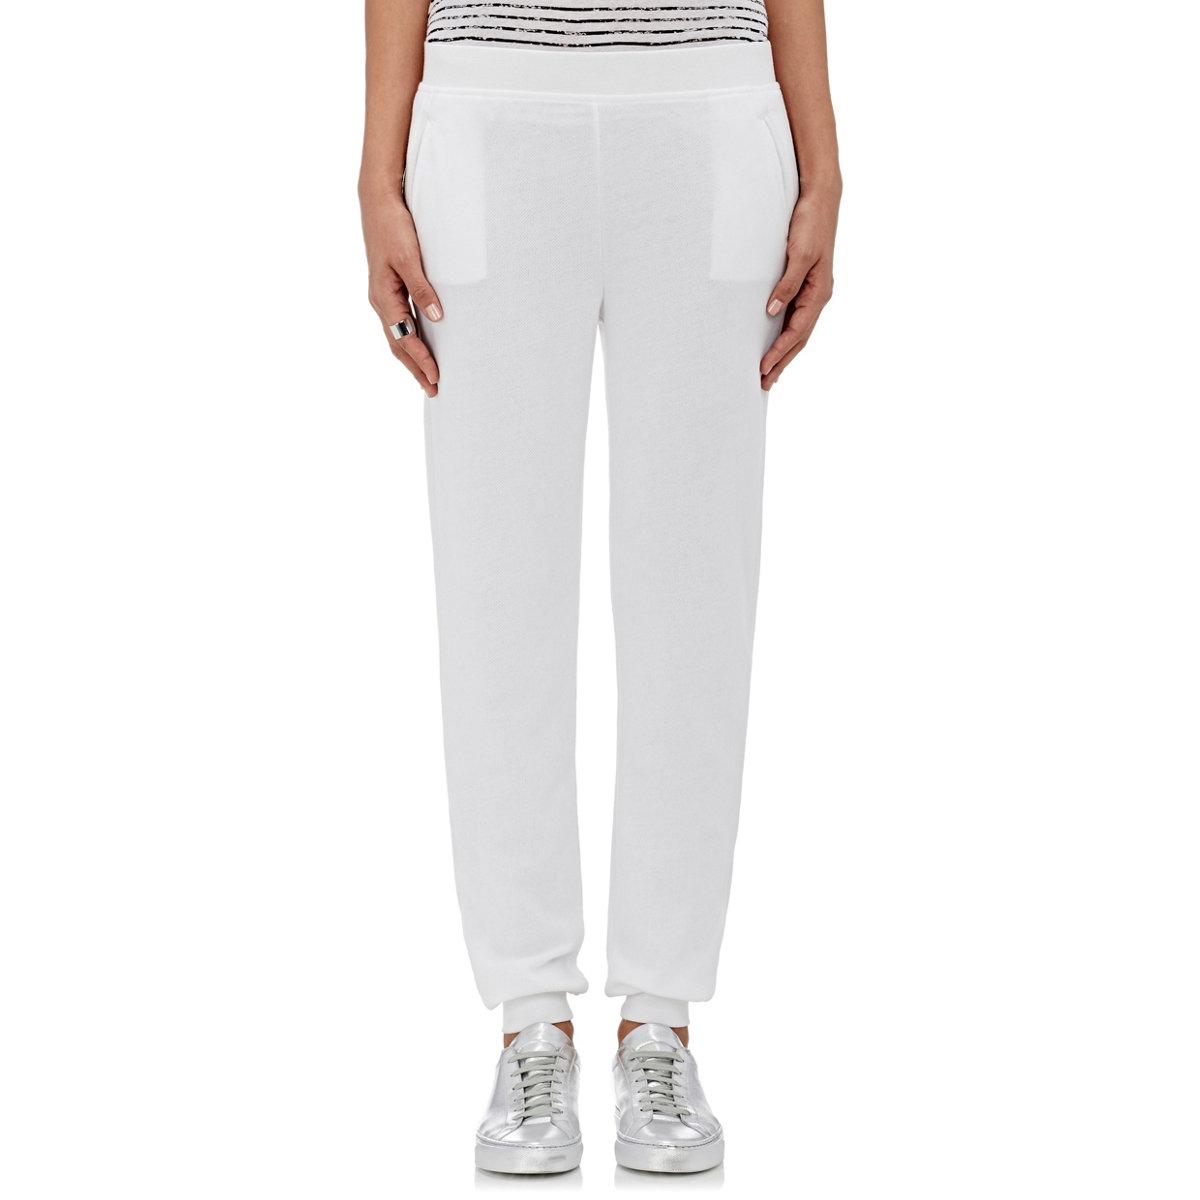 Atm Cotton French Terry Jogger Pants in White | Lyst